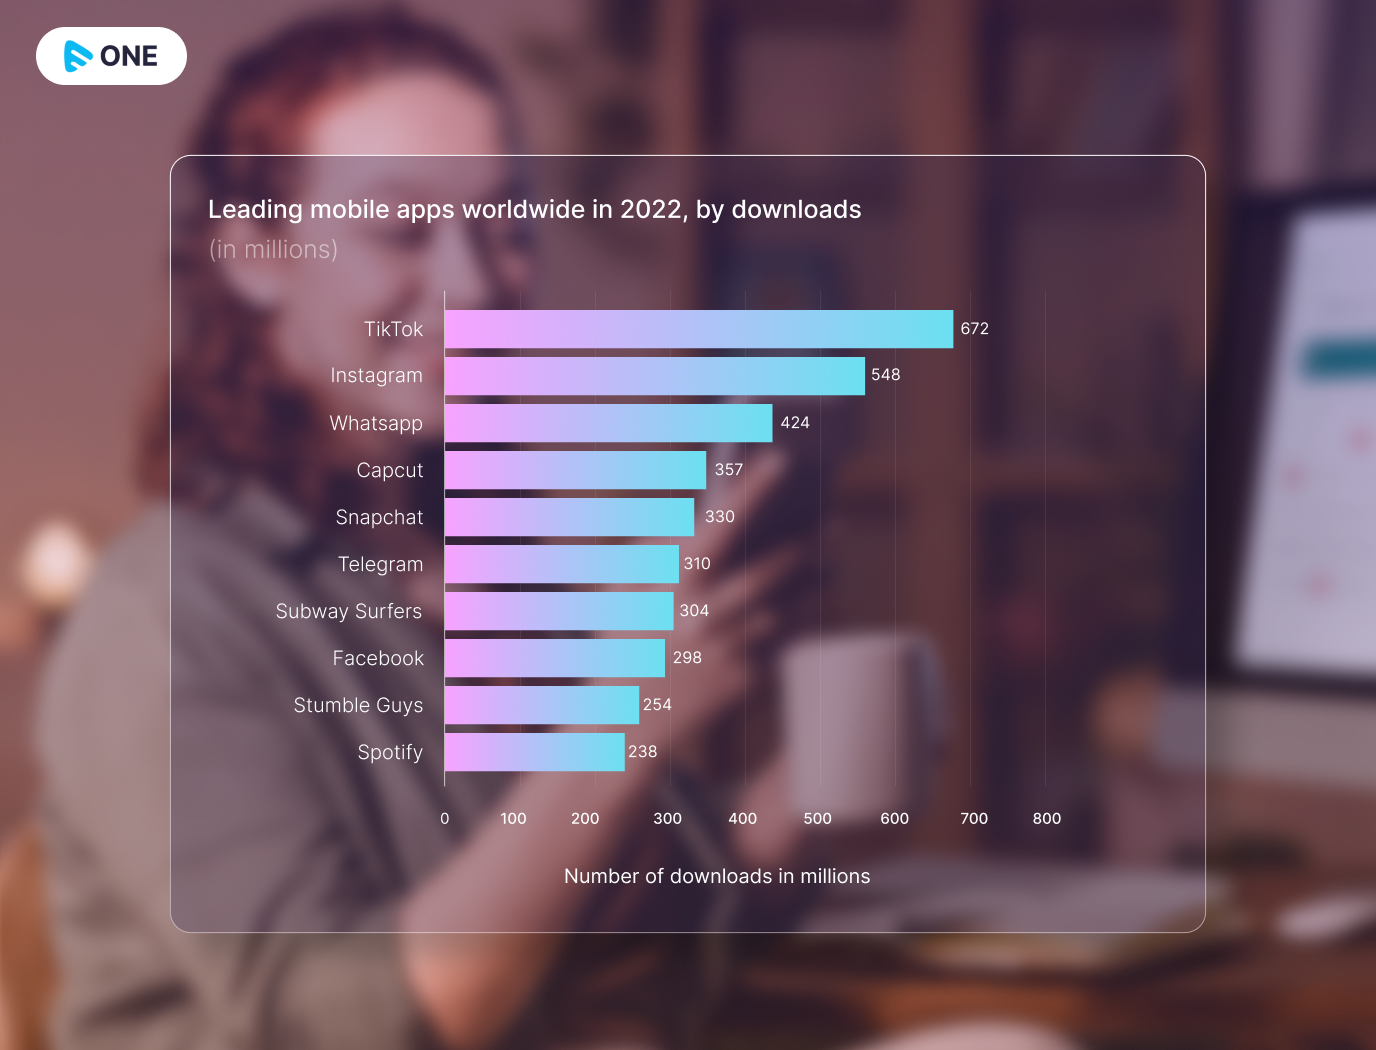 leading mobile apps worldwide in 2022 by downloads